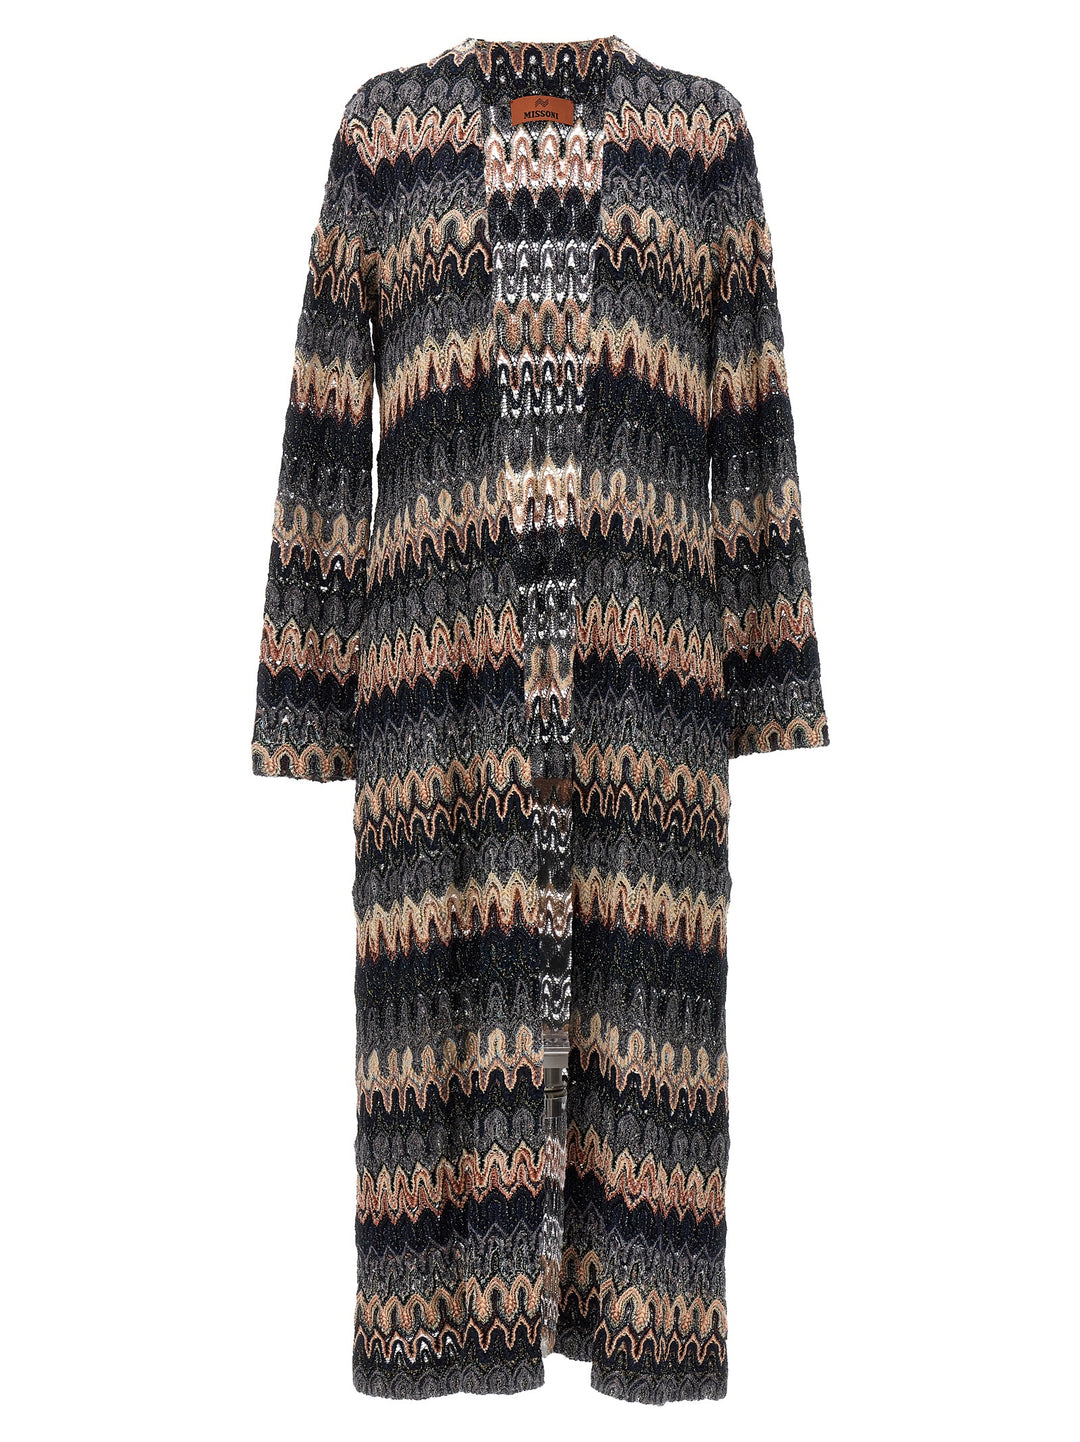 Patterned Long Cardigan Maglioni Multicolor